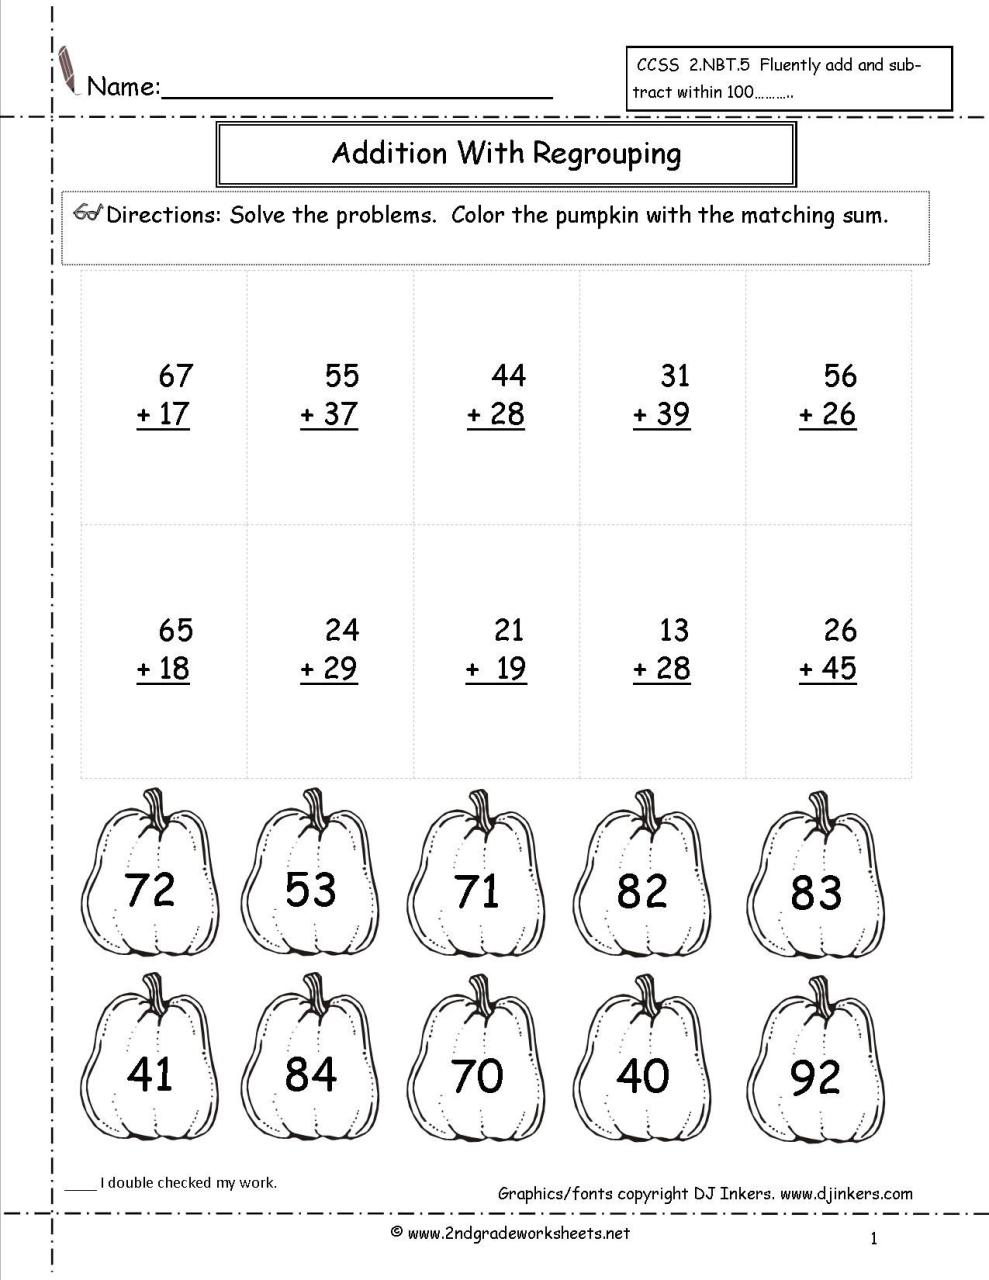 Double Digit Addition With Regrouping